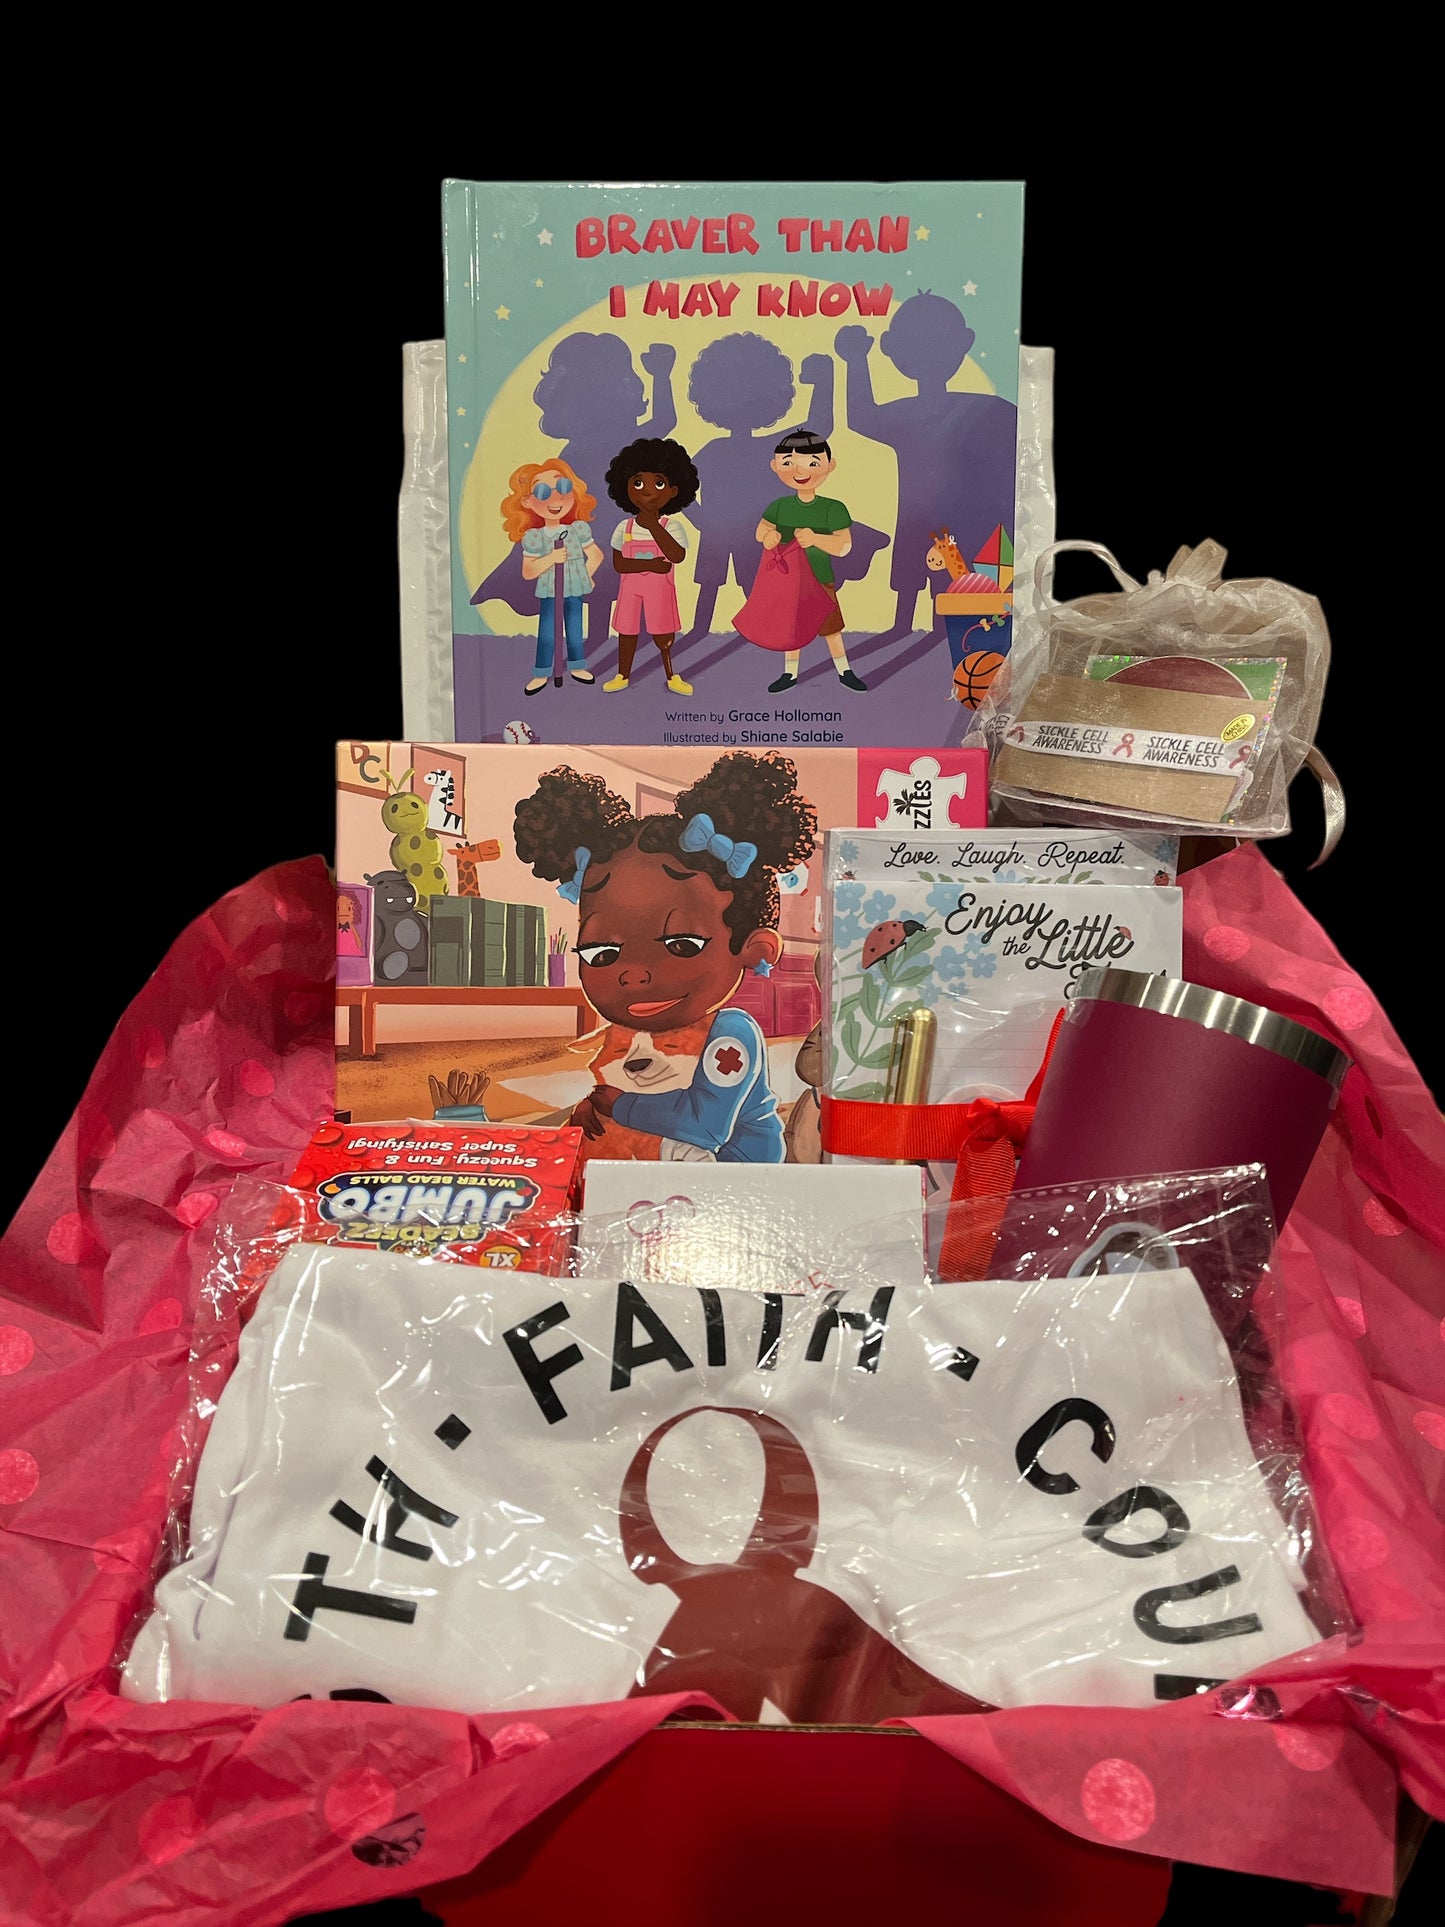 September Box: The “WARRIOR” Box (Sickle Cell)